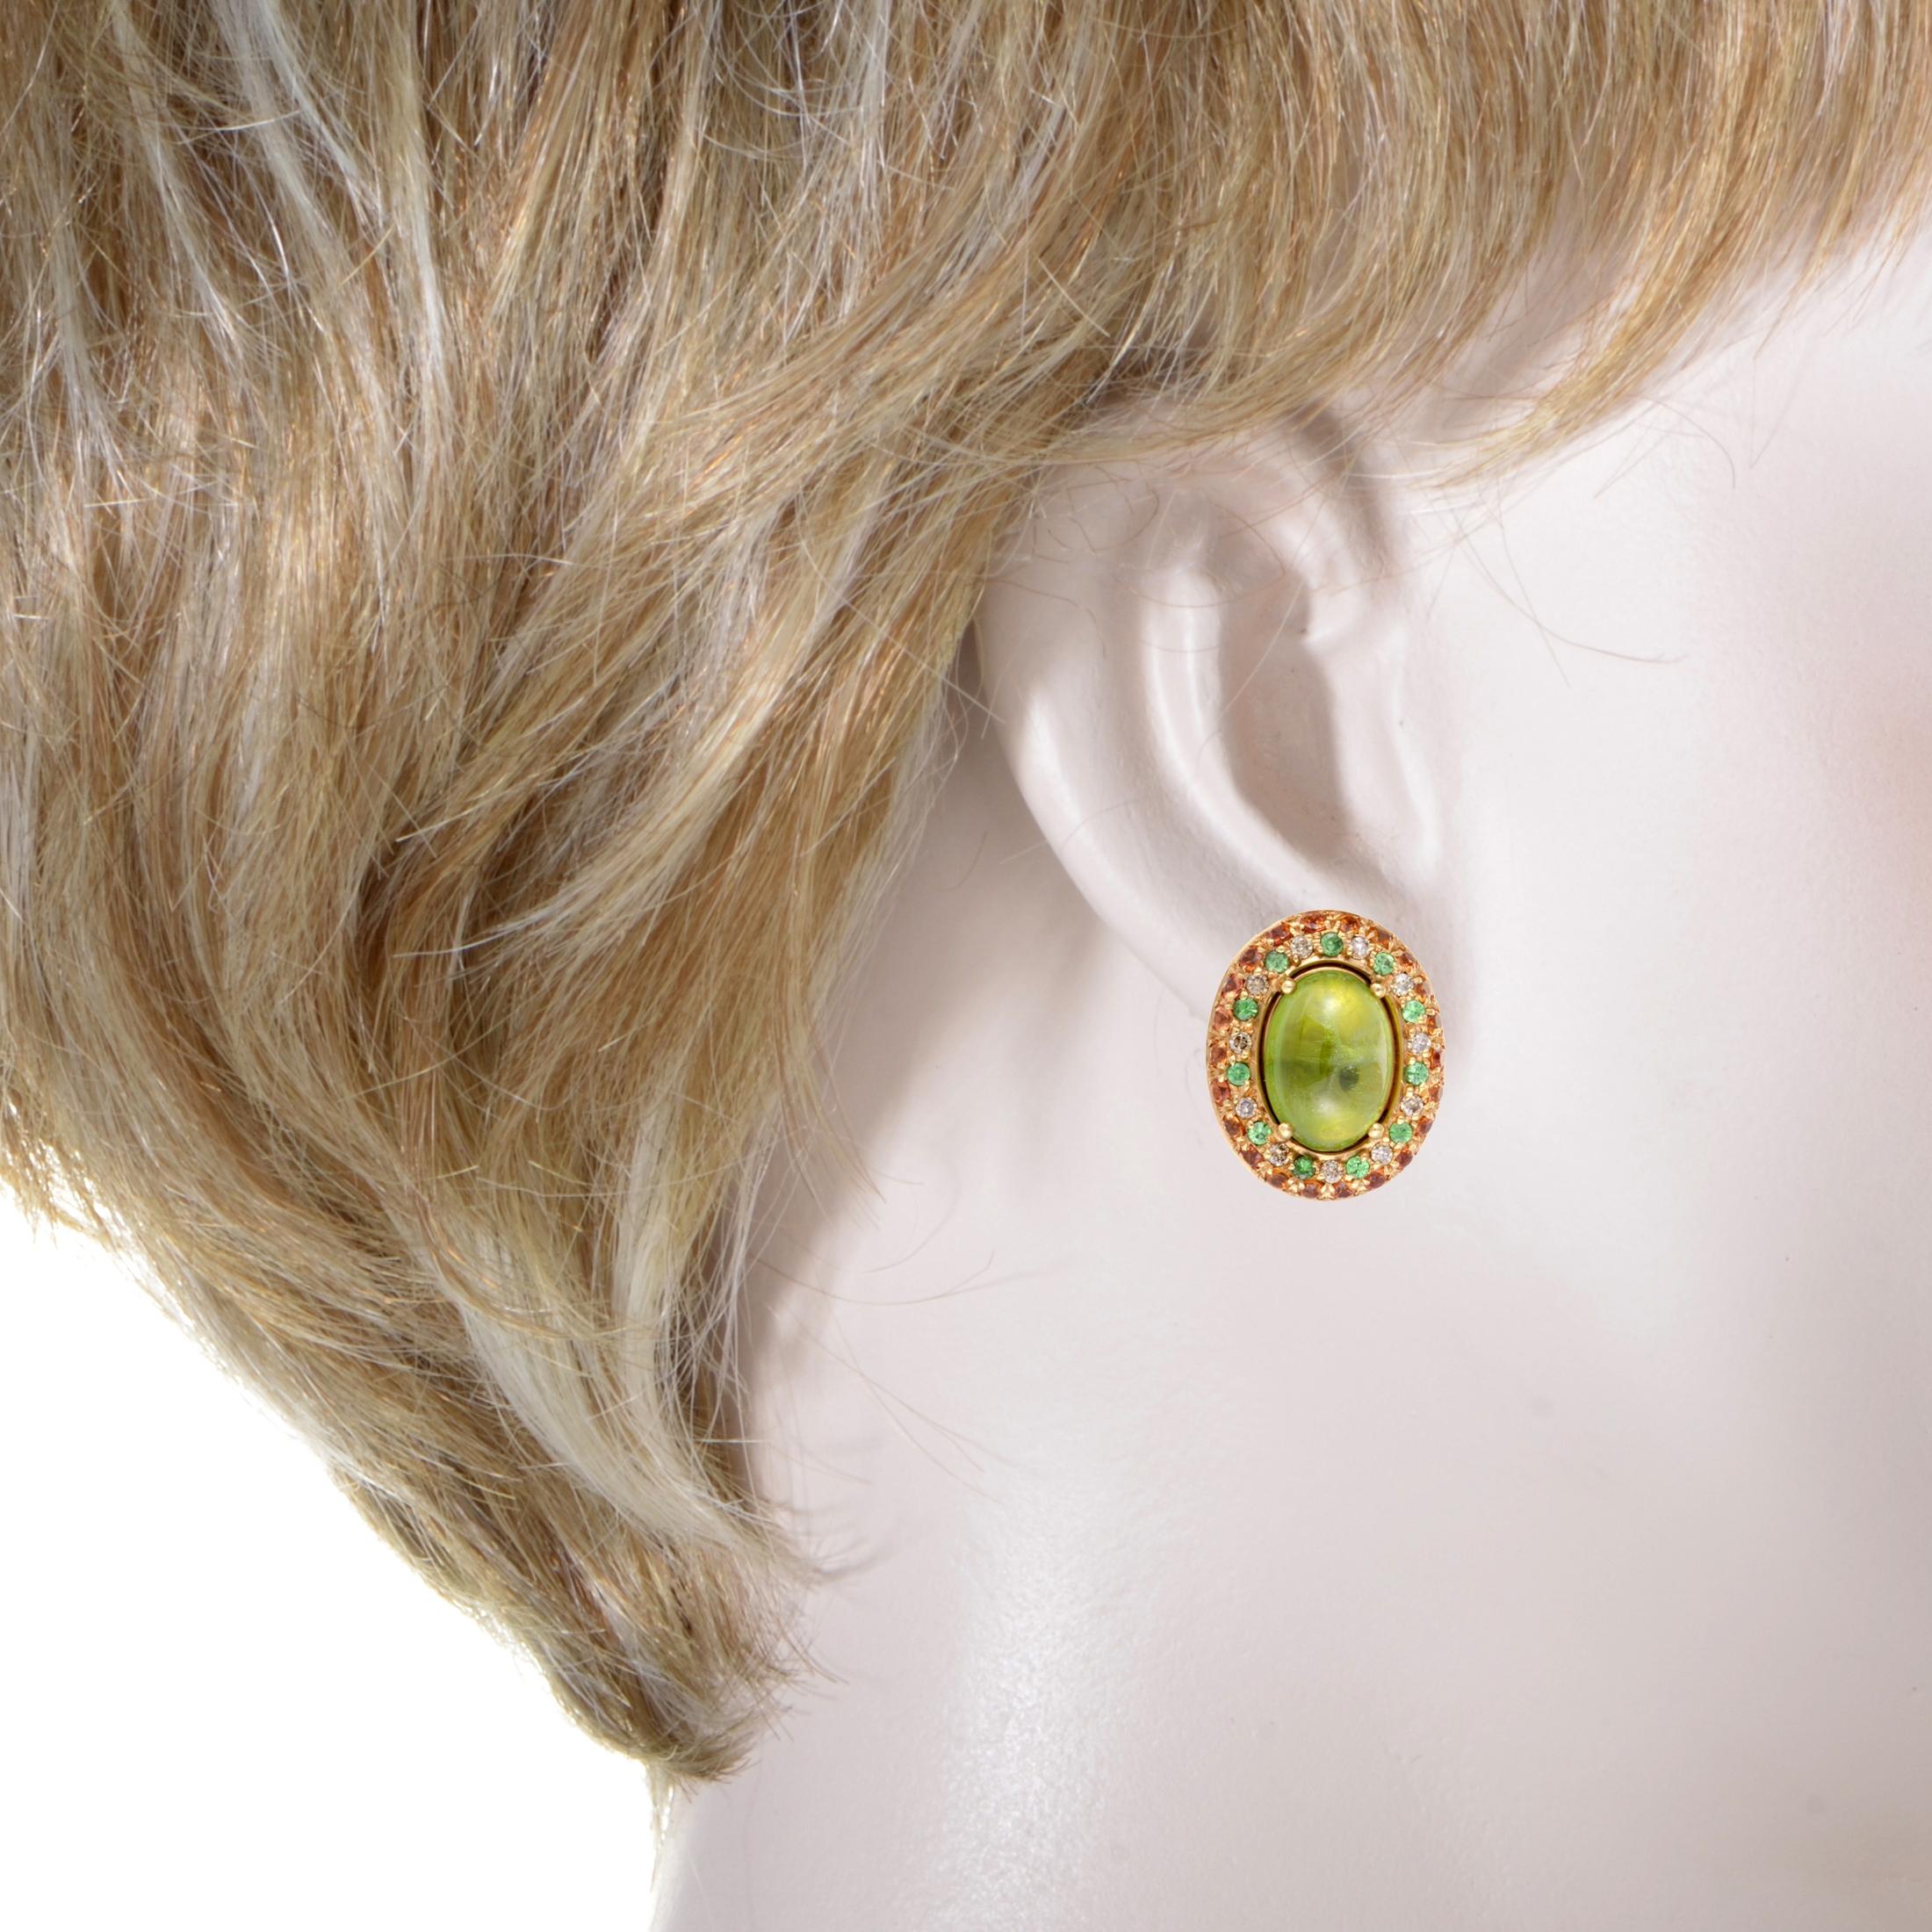 These dazzling earrings compel with their exquisite design and attractive décor, offering a look of utmost extravagance. Presented by Gianni Lazzaro, this pair of earrings is made of alluring 18K rose gold. The earrings feature two peridots as